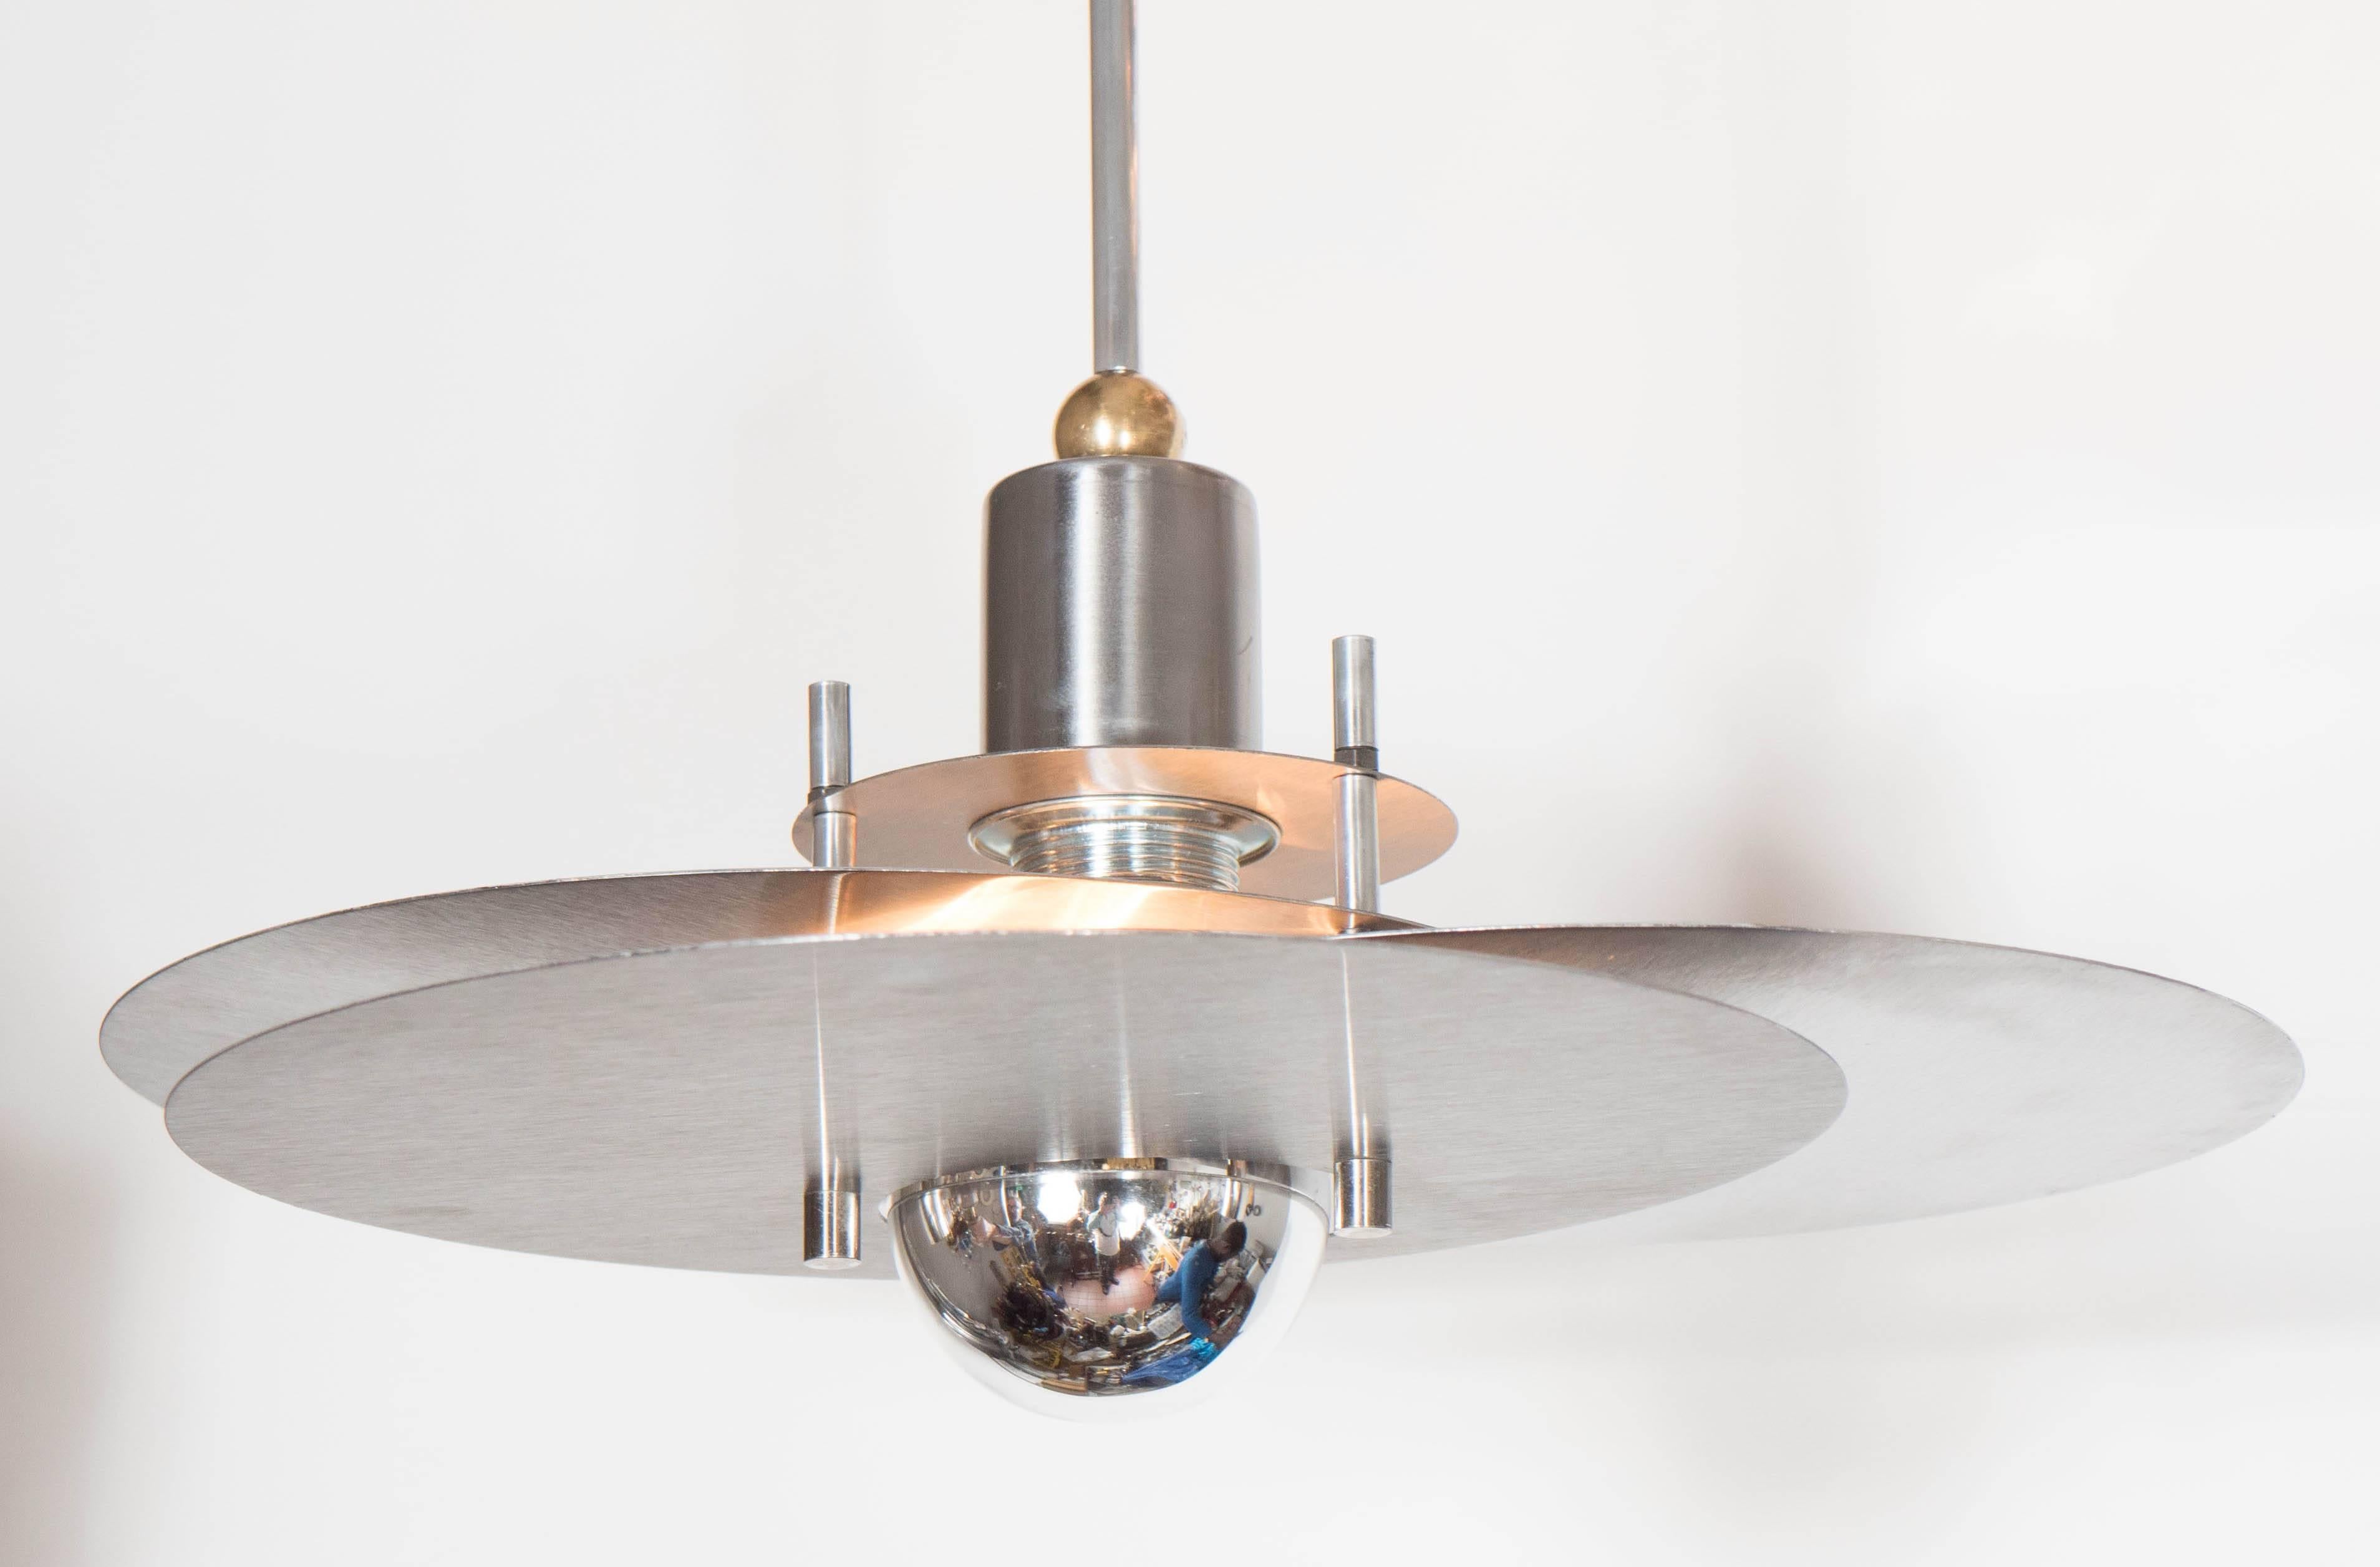 French Sculptural Bauhaus Style Mid-Century Modernist Chandelier by Rene Herbst For Sale